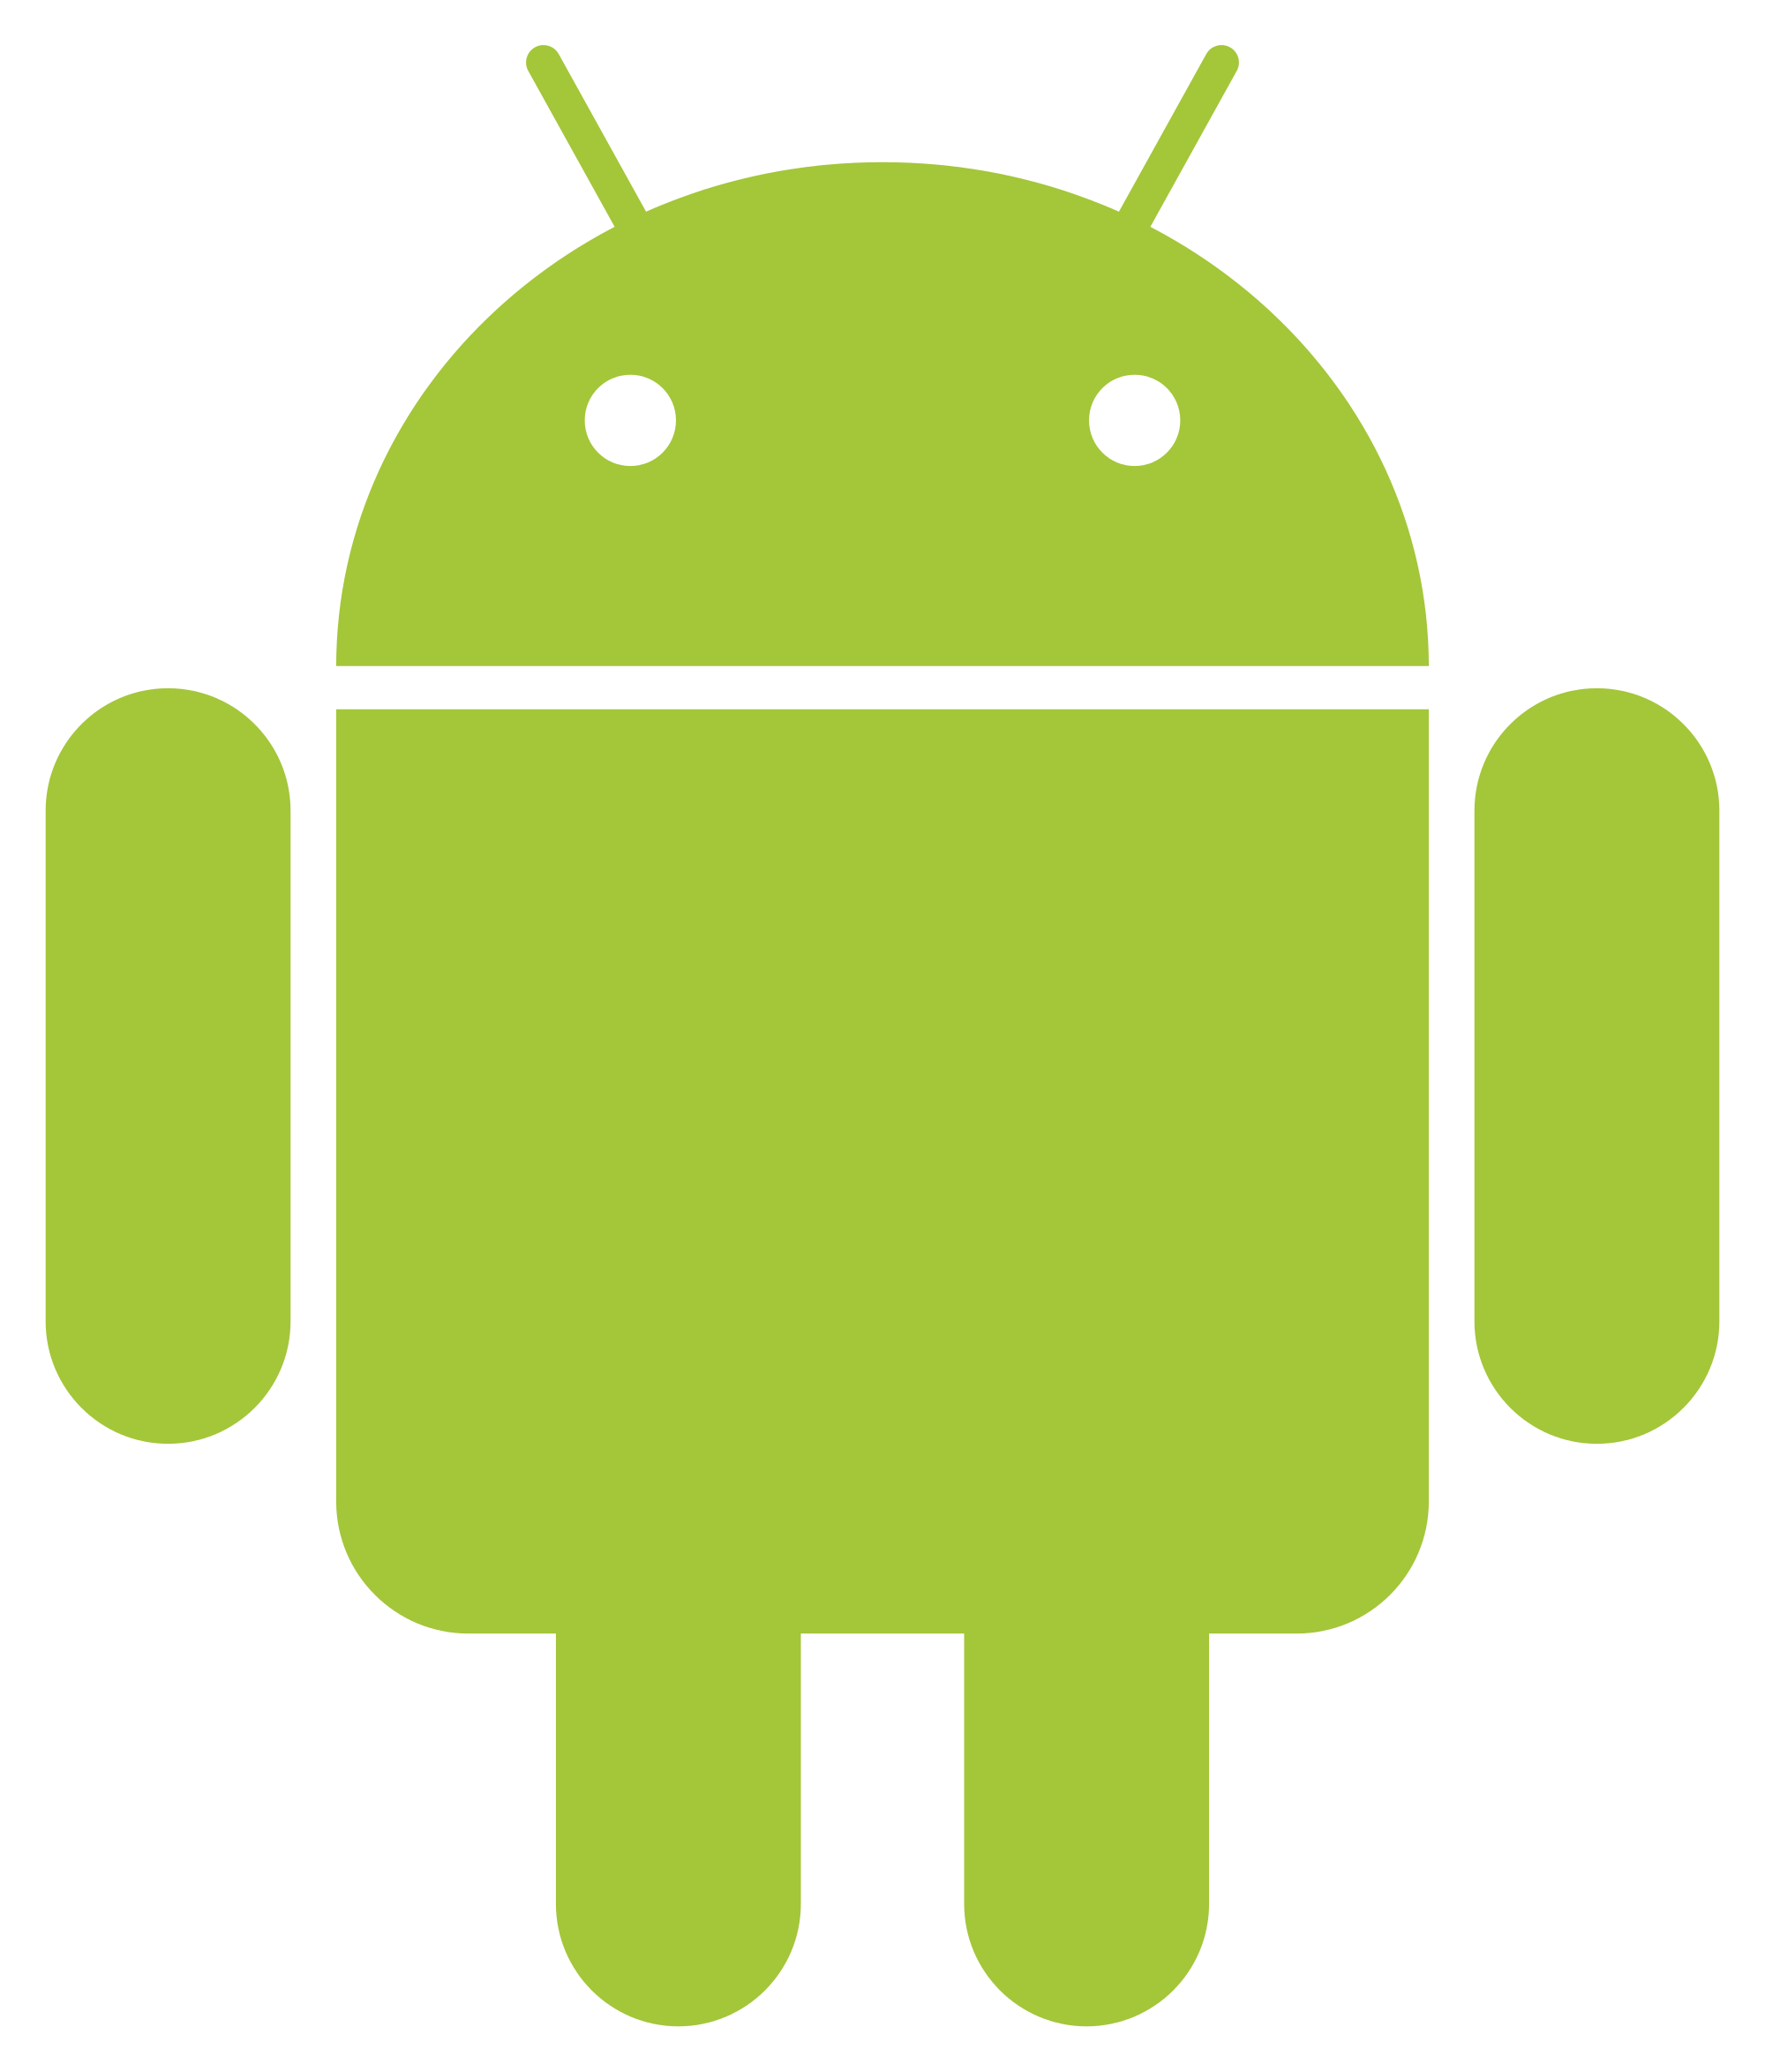 System Application Operating Logo Android Software PNG Image